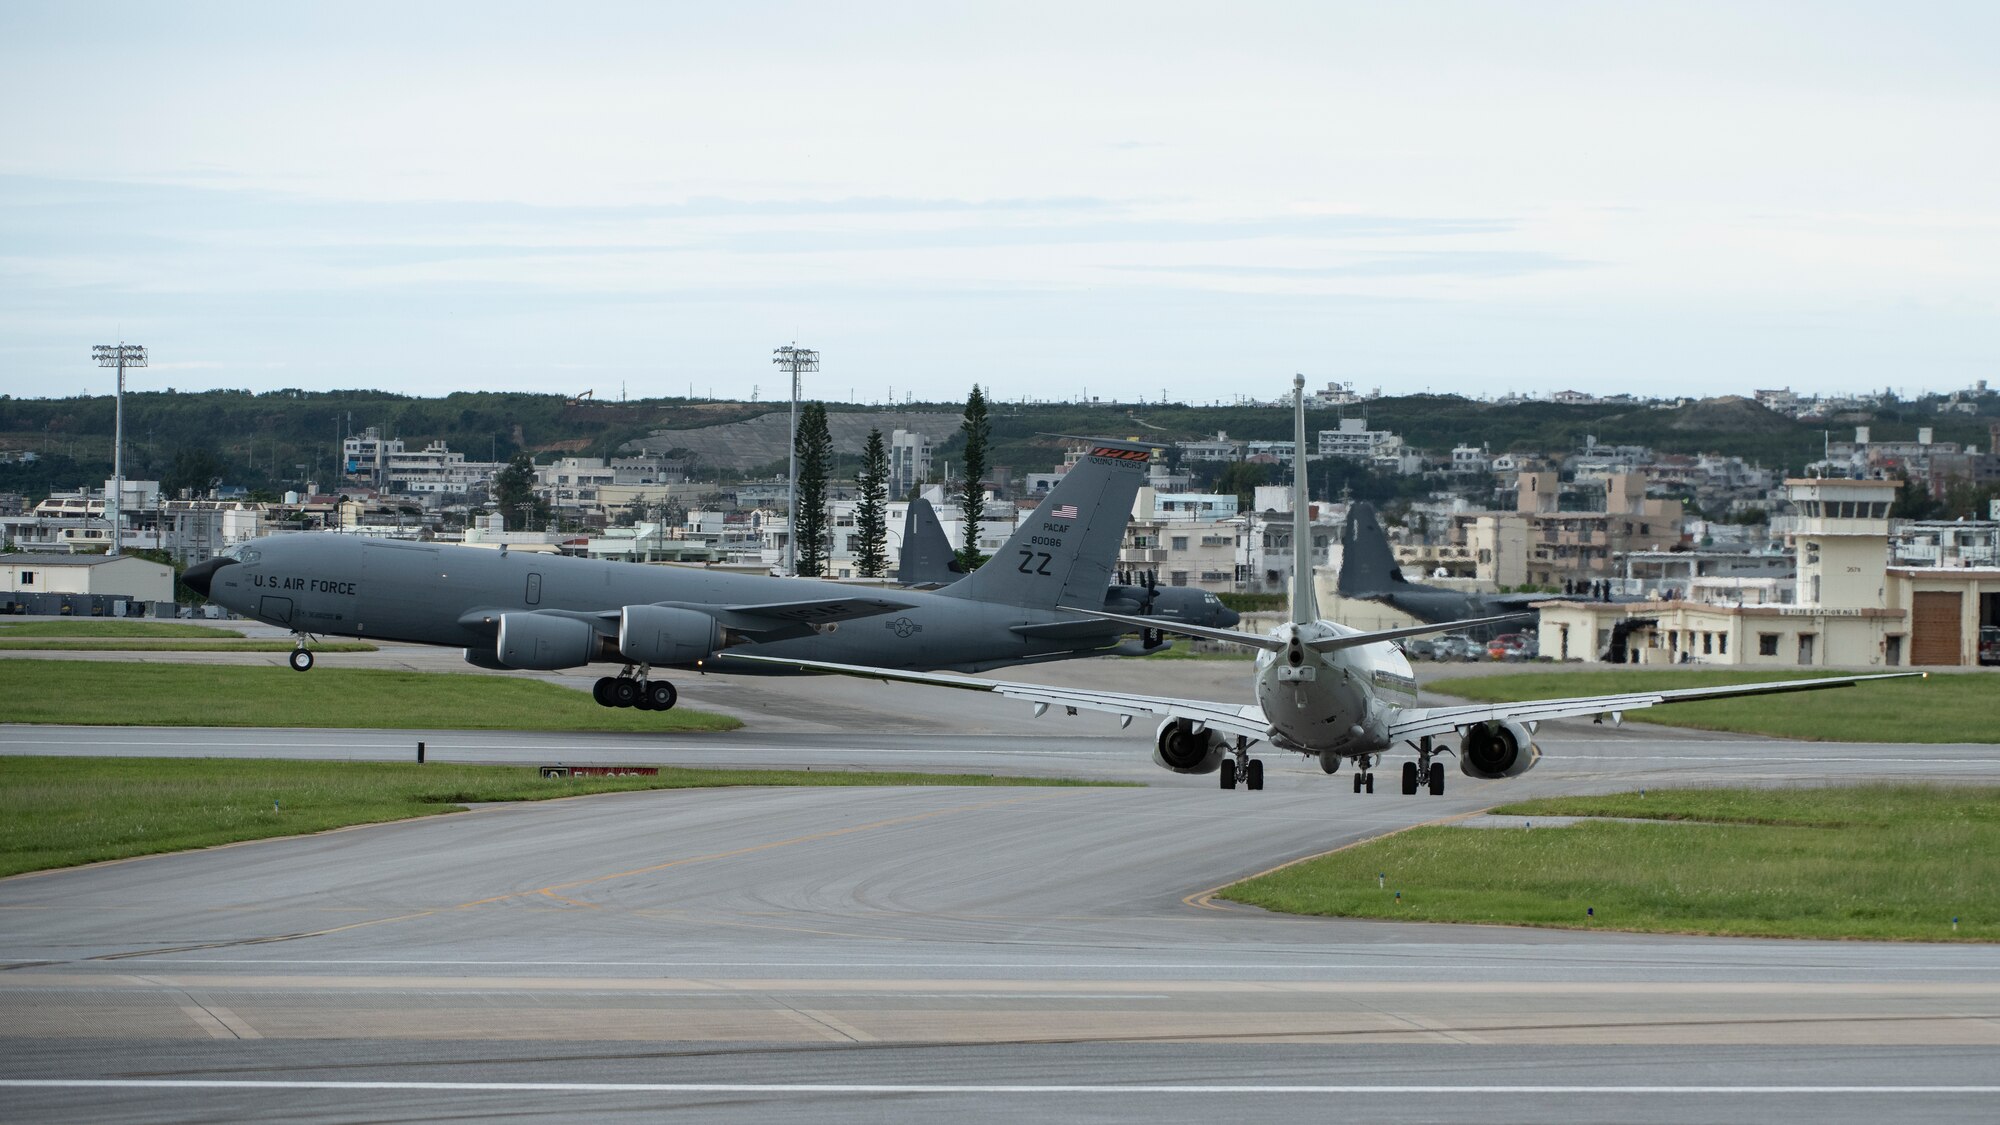 A U.S. Air Force 909th Aerial Refueling Squadron KC-135 Stratotanker conducts touch and go training while a U.S. Navy P-8A Poseidon stands by for taxi clearance Sept. 14, 2020, at Kadena Air Base, Japan. Team Kadena’s flexible multilateral operations capability enables combined, large force employment by U.S. and allied air units from anywhere in the world.